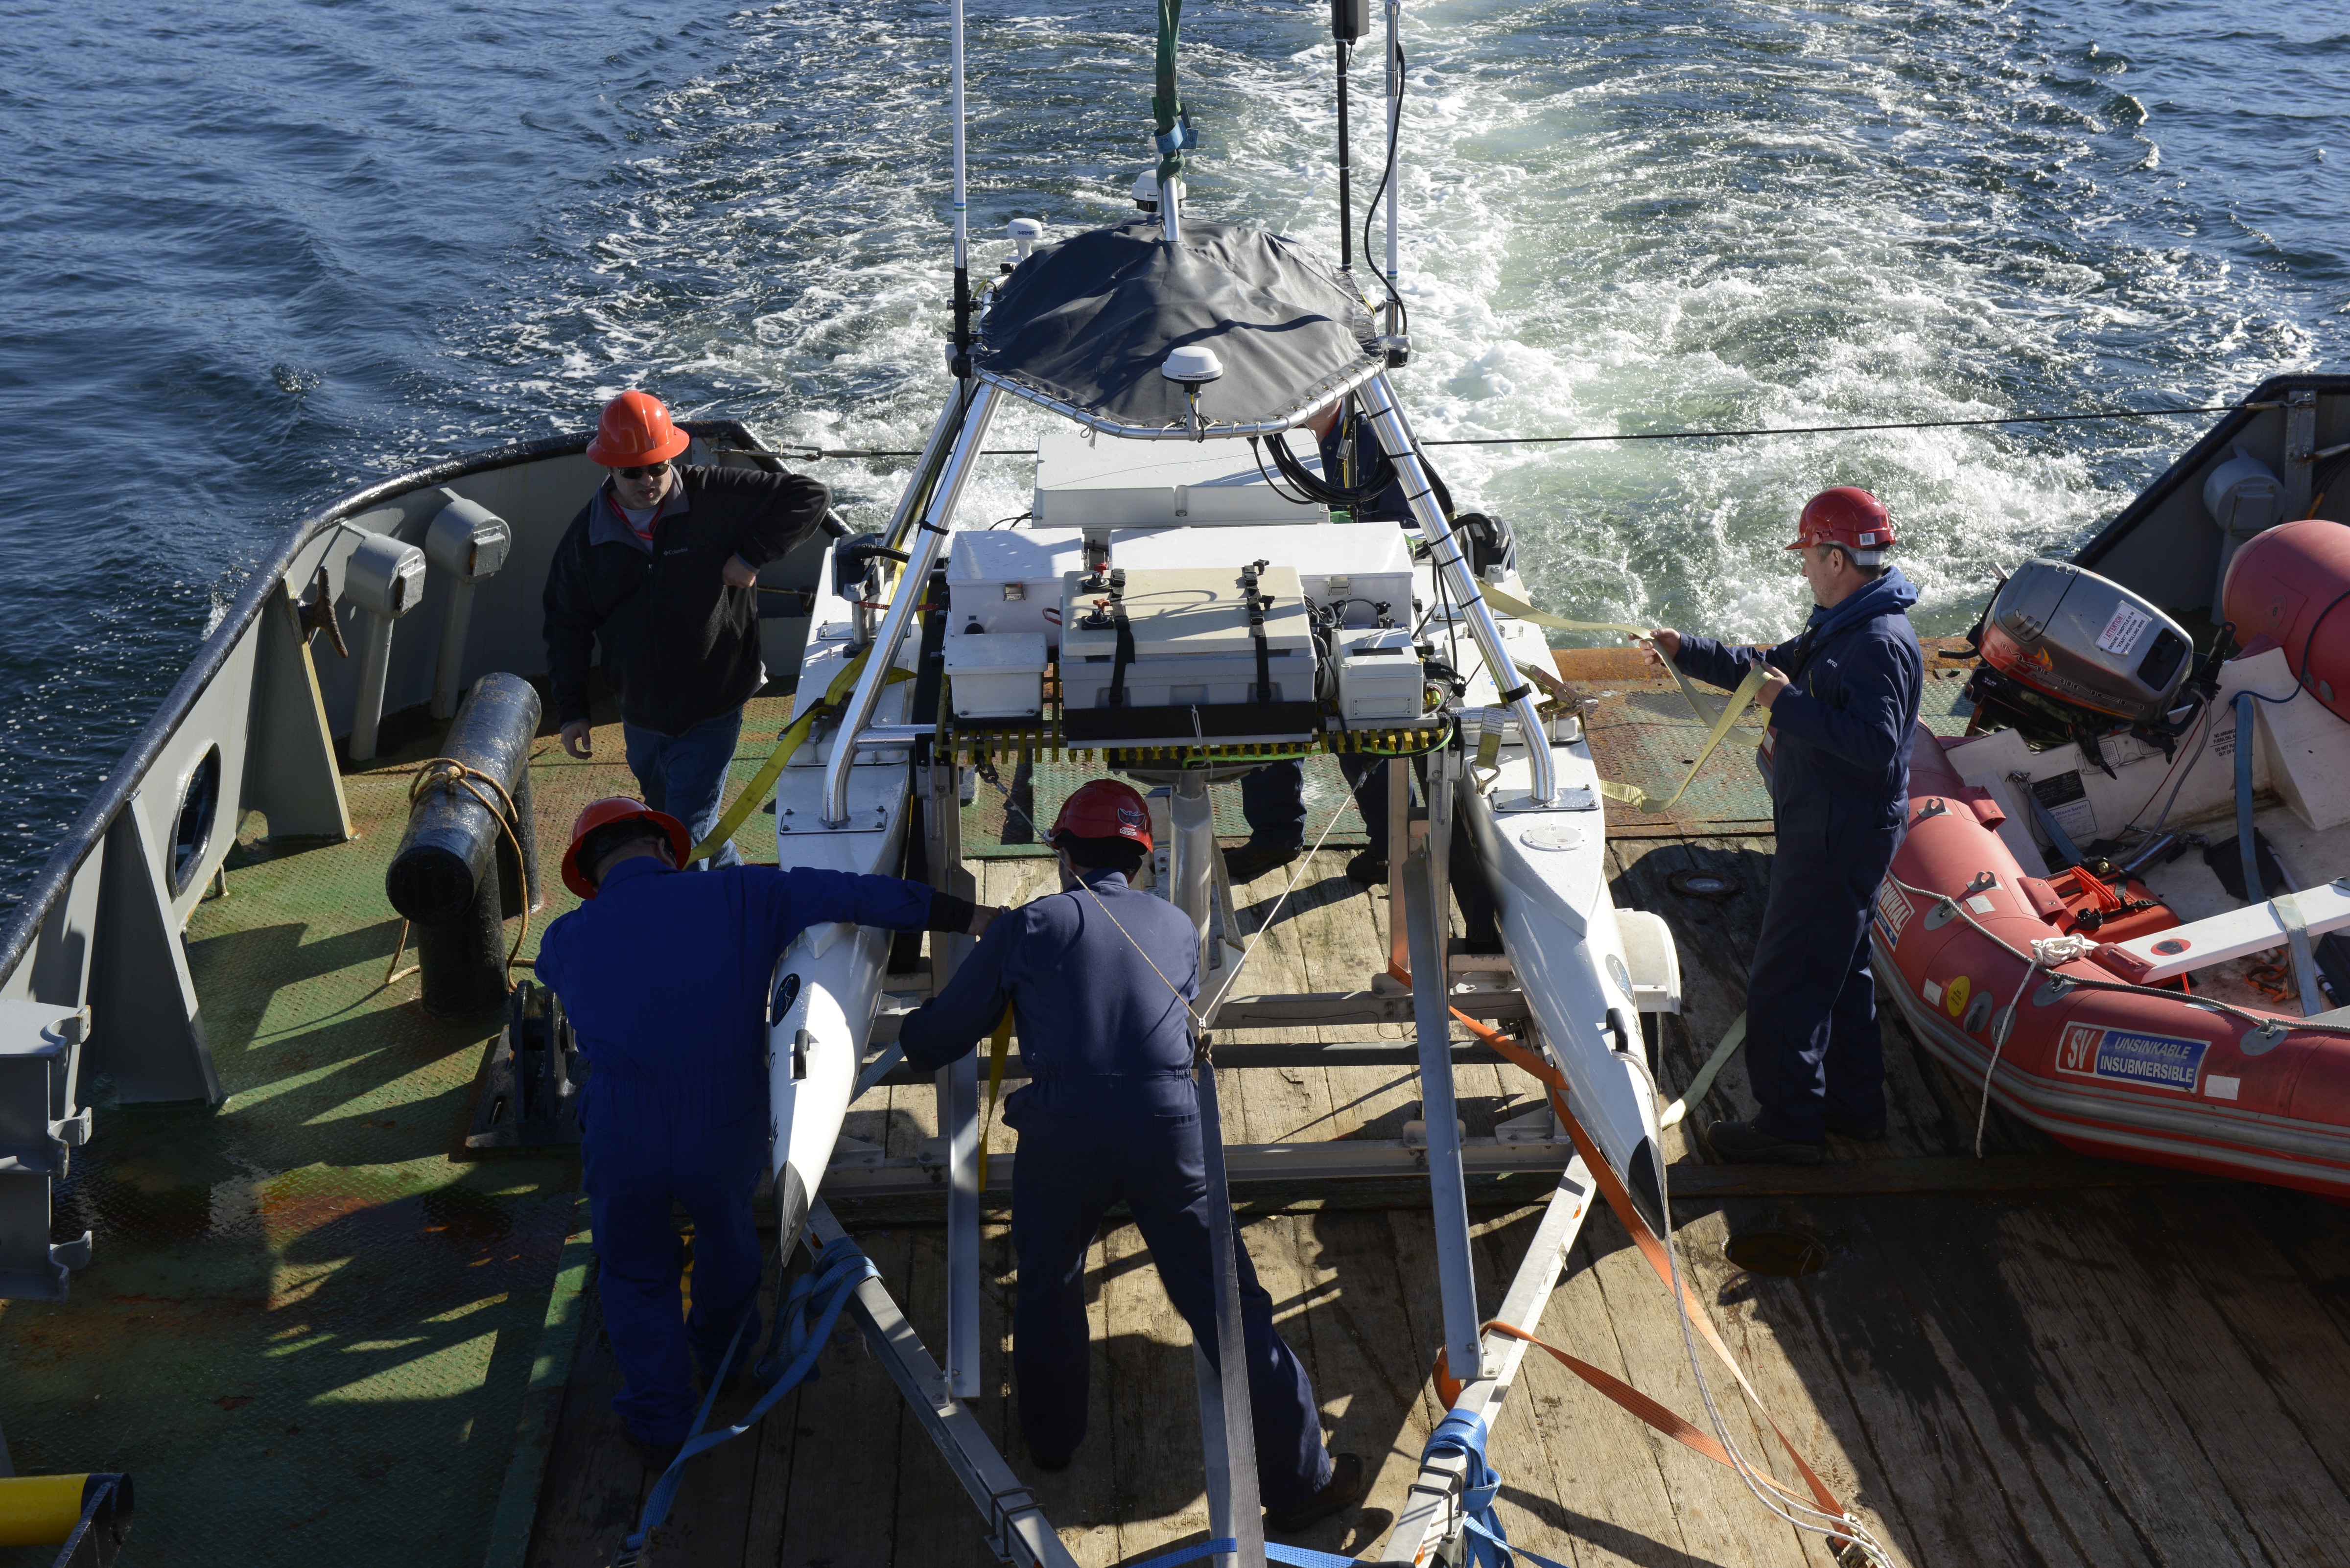 Defence Research and Development Canada technologists and ship crew secure their USV-2600 unmanned surface vehicle on the SD Kyle of Lochalsh ship after completing a mission in Belmacara Bay. Photo by Janice Lang, DRDC